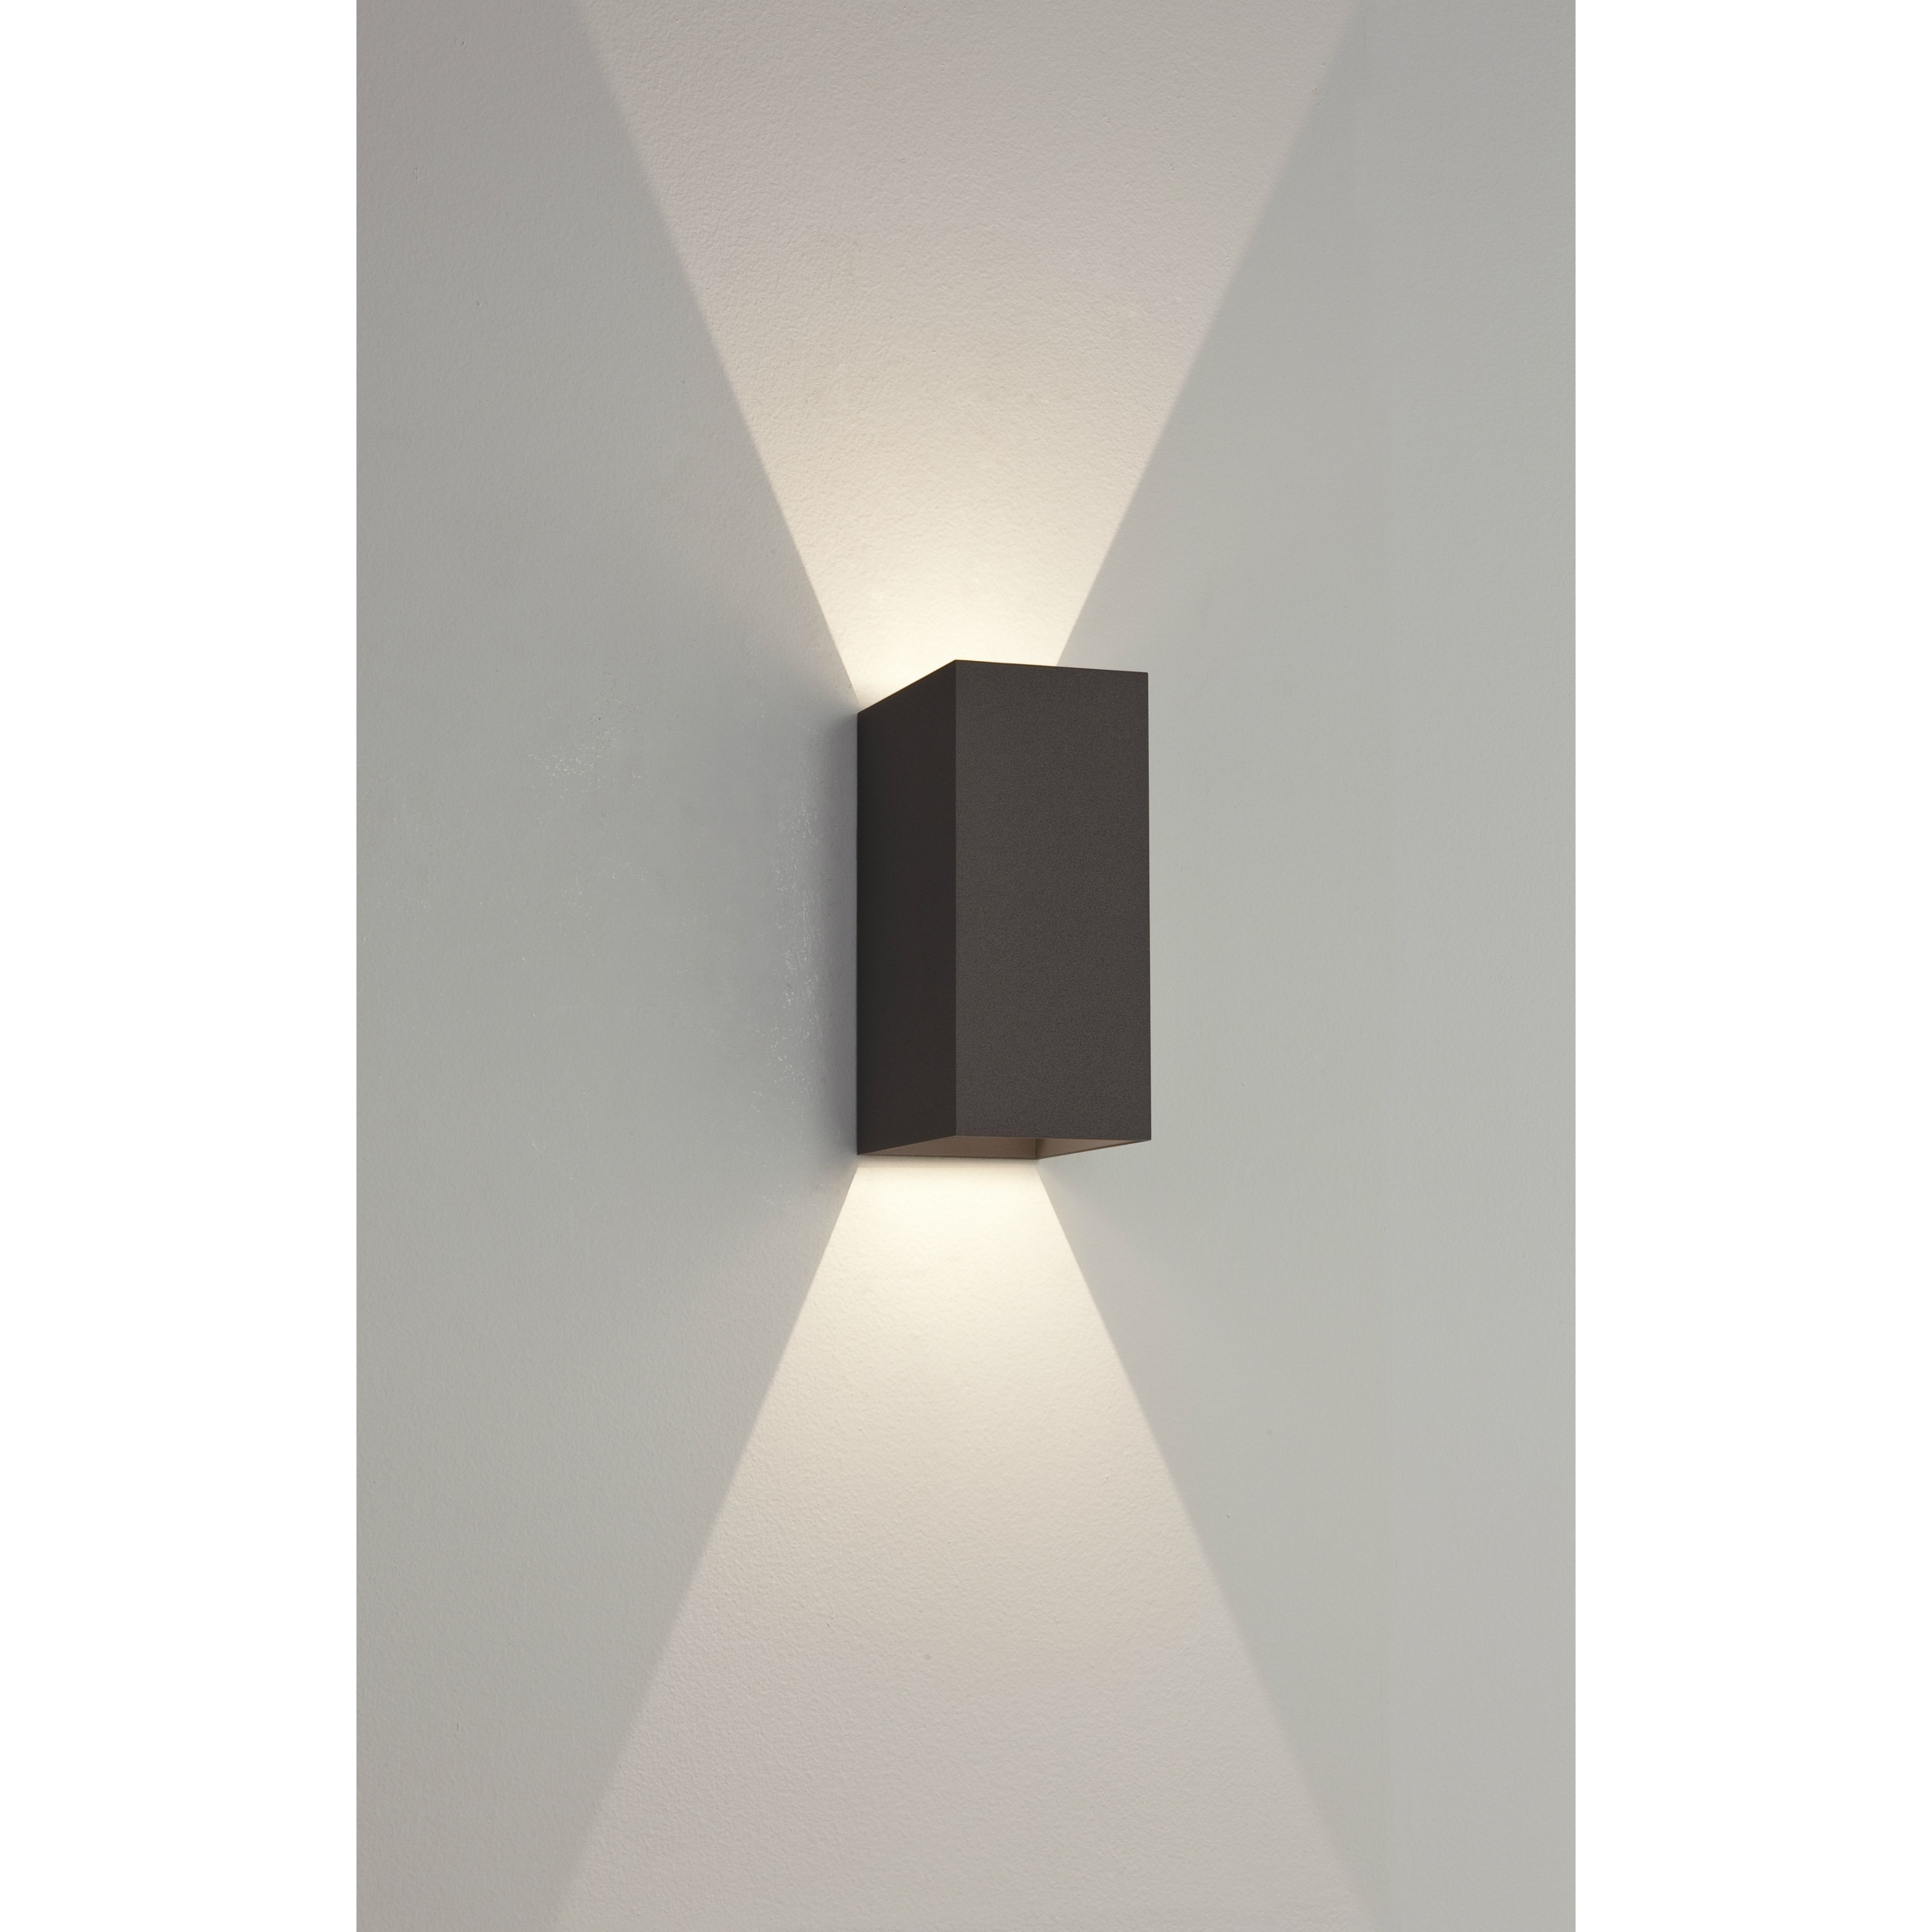 Half Wall Lanterns & Lights | Product Categories | Light Innovation With Regard To Cheap Outdoor Wall Lighting (View 4 of 15)